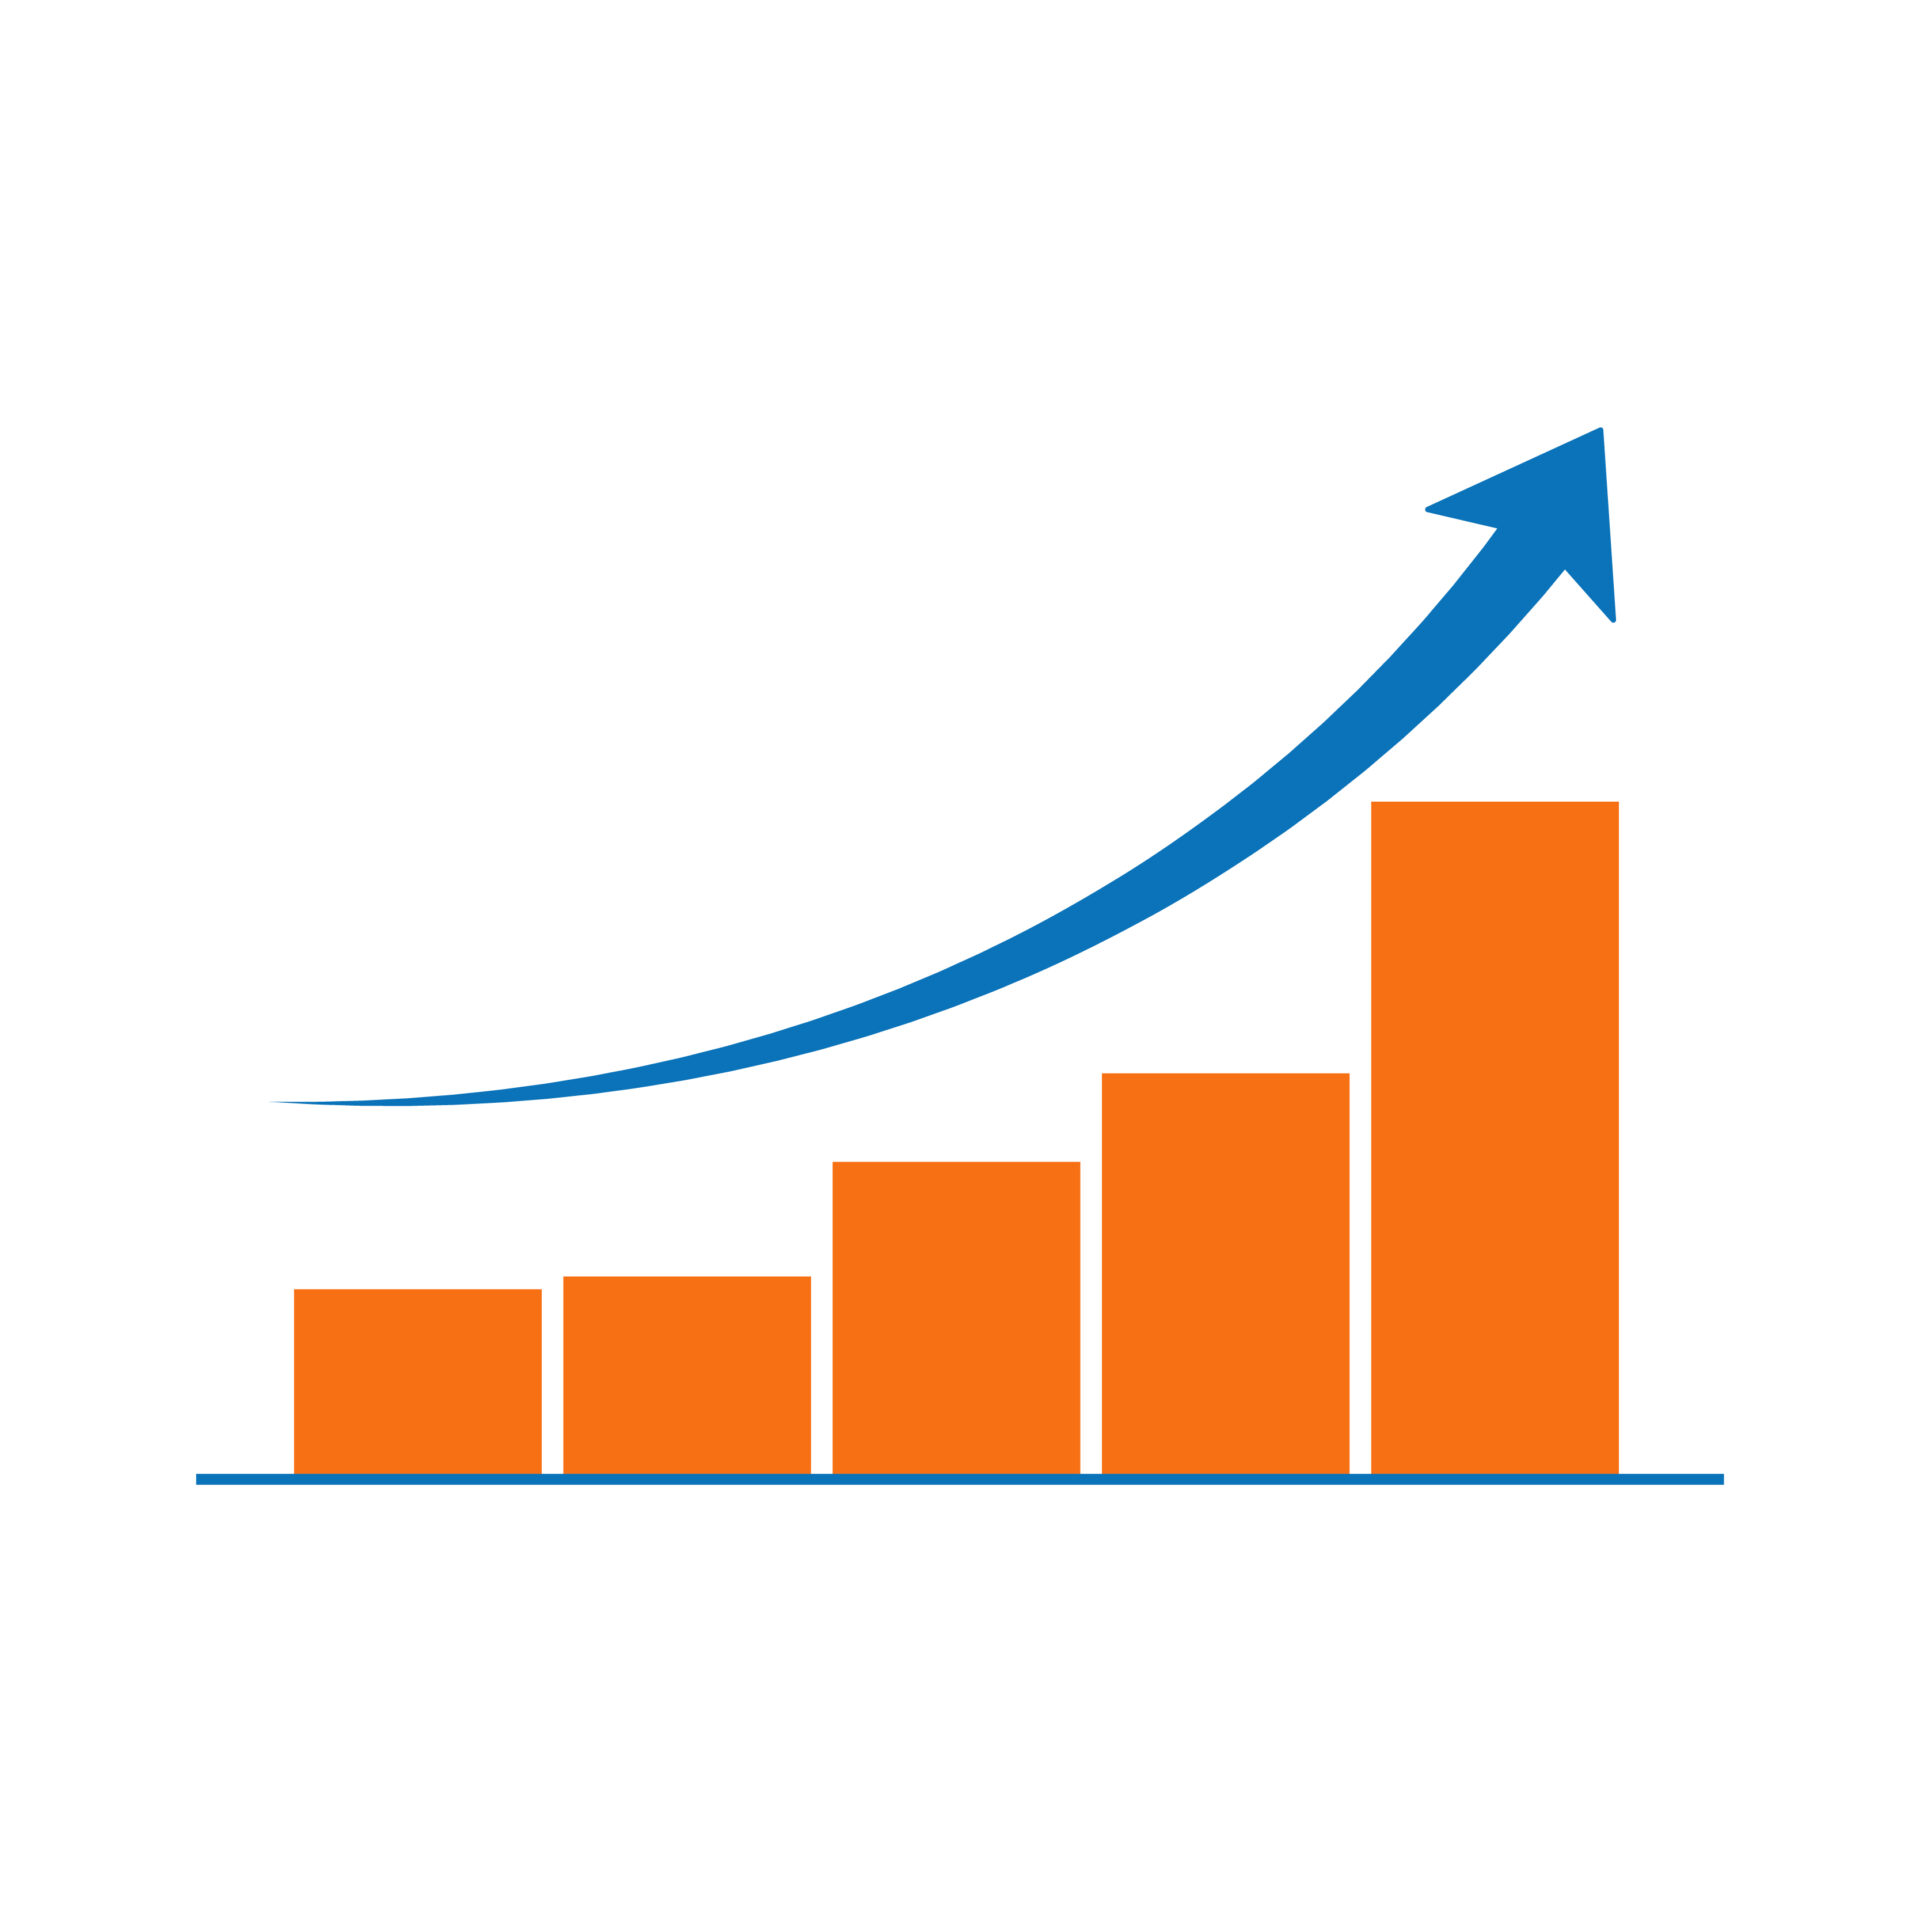 A blue arrow is pointing up on top of the graph.